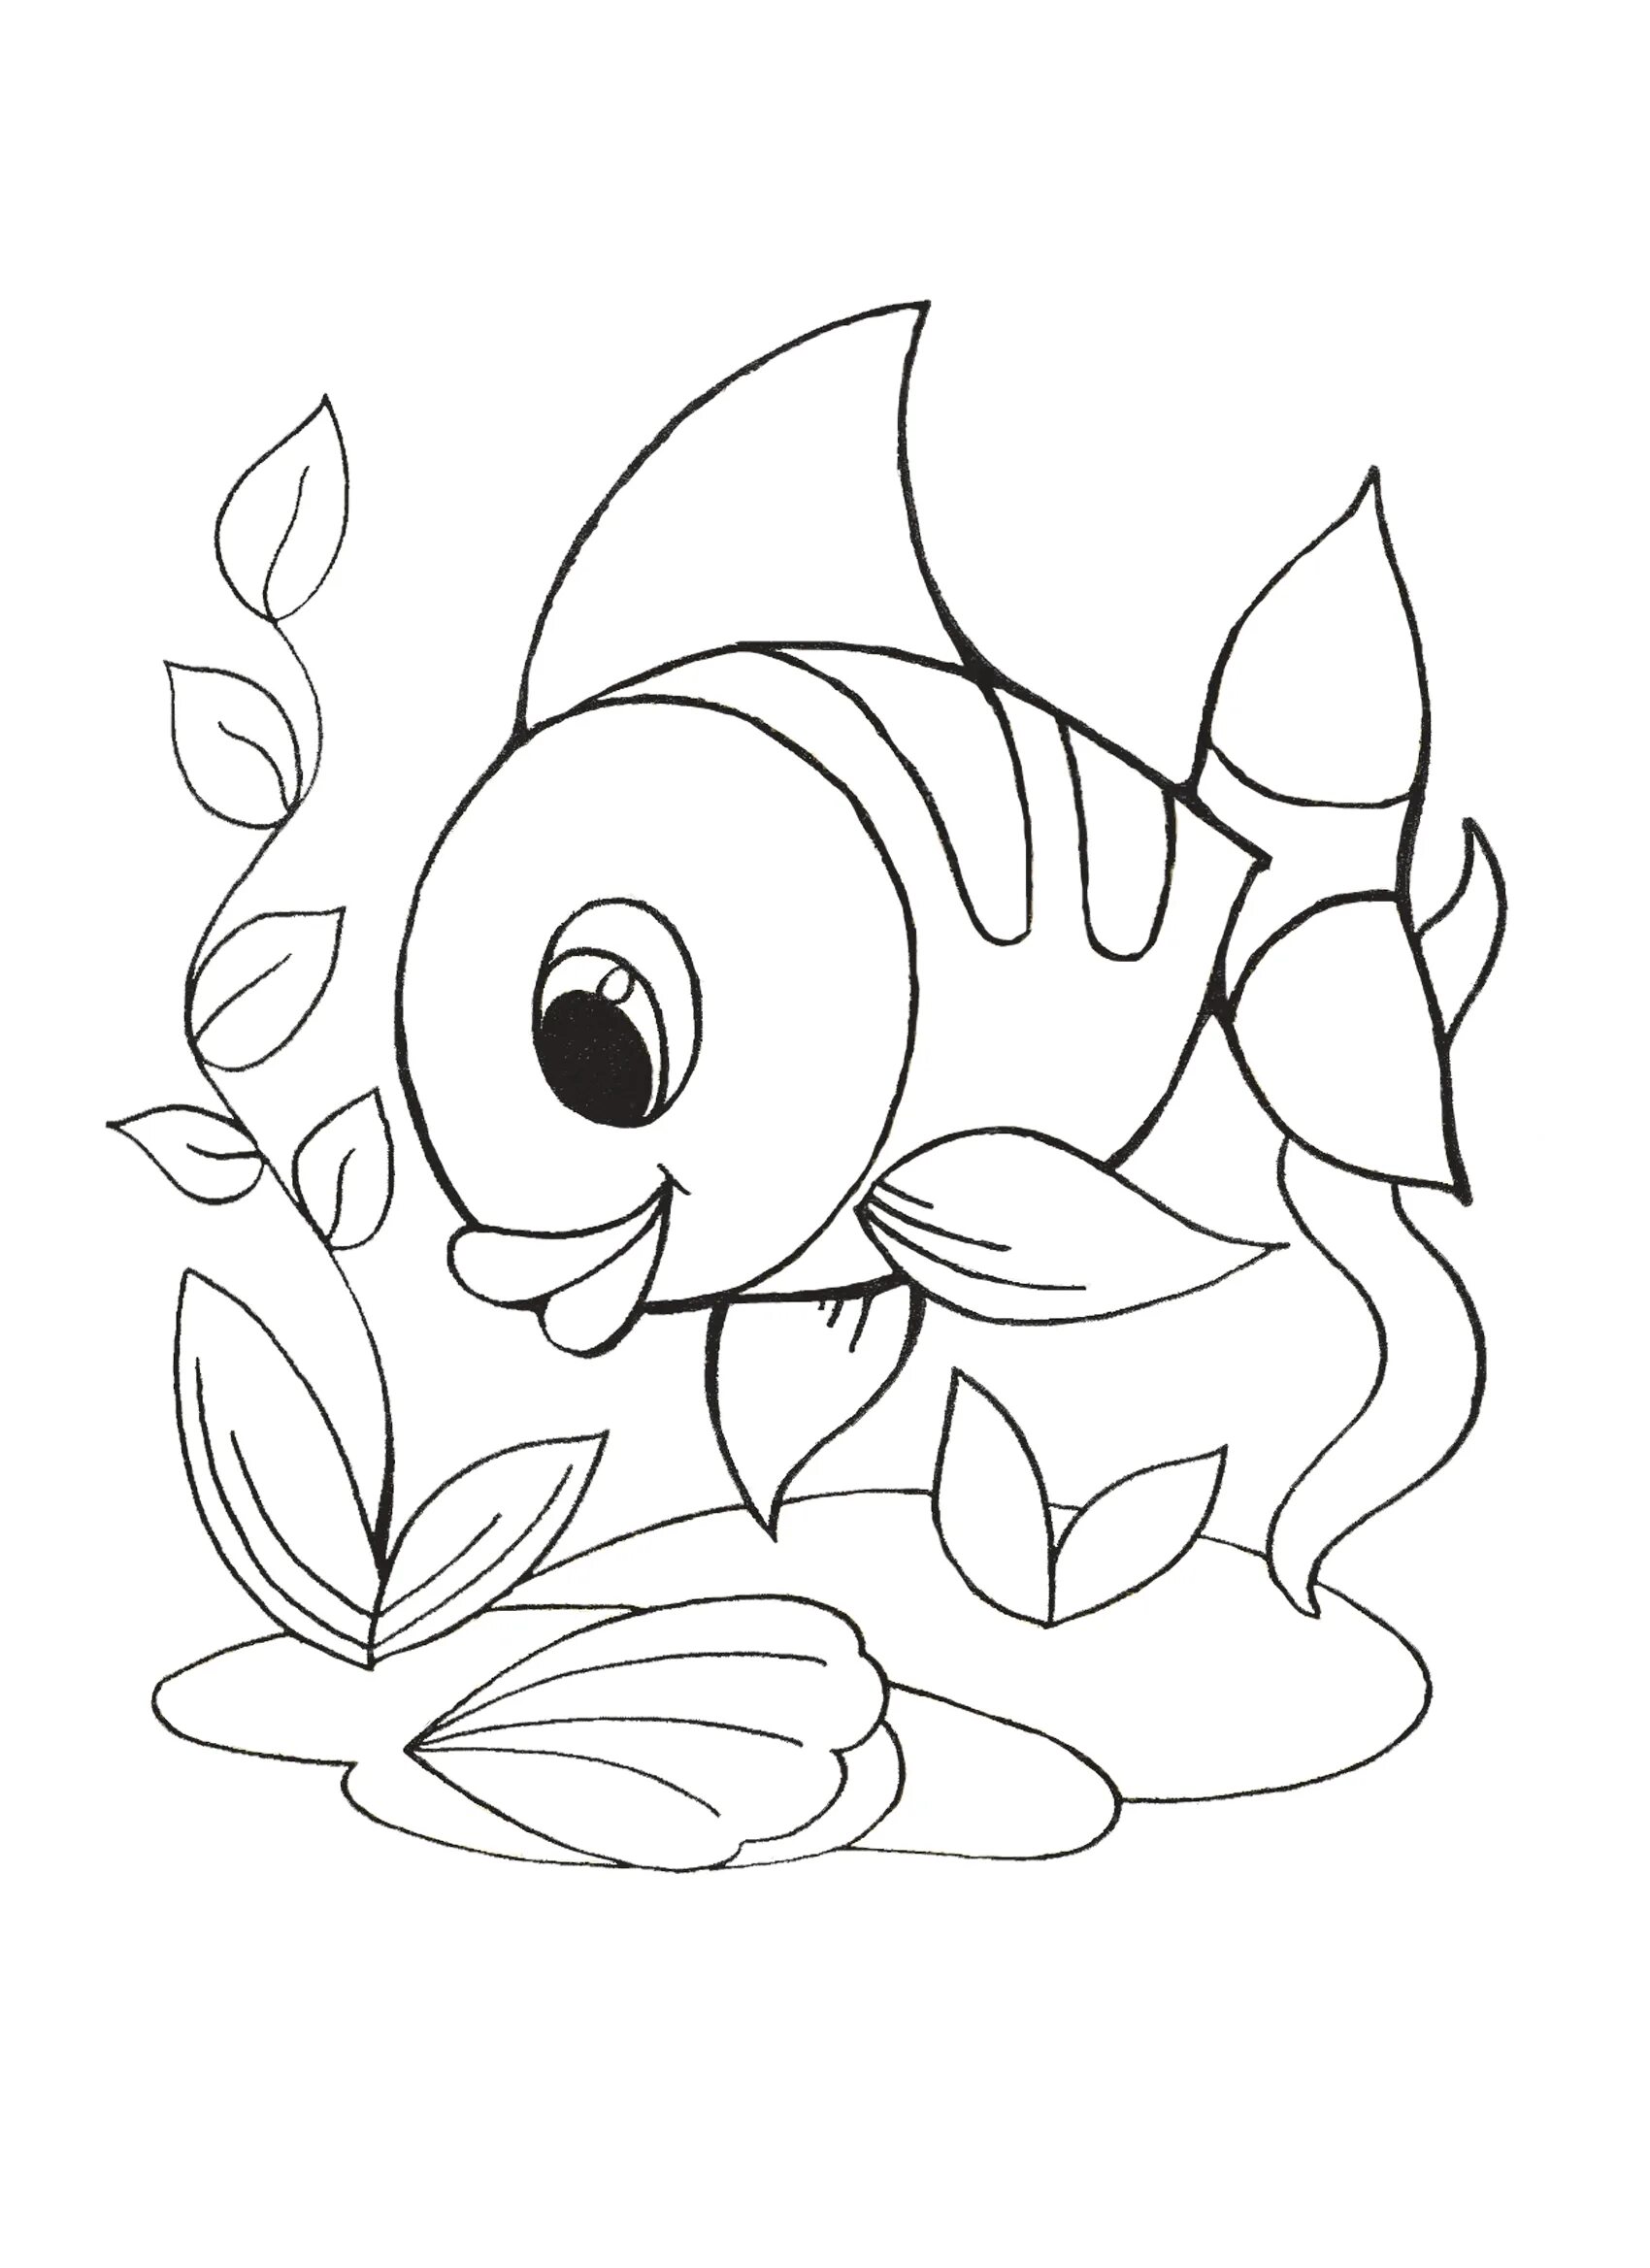 Attracting fish with seaweed coloring page